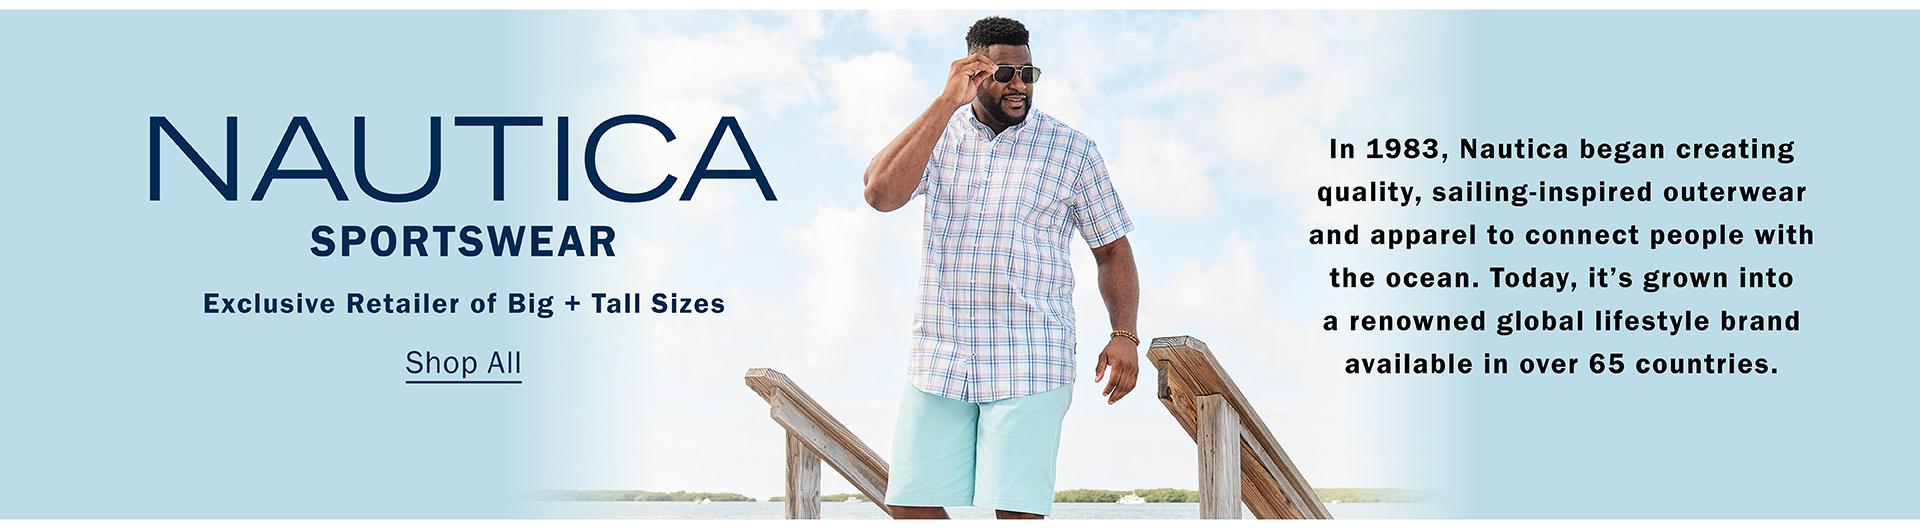 NAUTICA SPORTSWEAR | Exclusive Retailer of Big + Tall Sizes | Shop All | In 1983, Nautica began creating quality, sailing-inspired outerwear and apparel to connect people with the ocean. Today, it’s grown into a renowned global lifestyle brand available in over 65 countries.